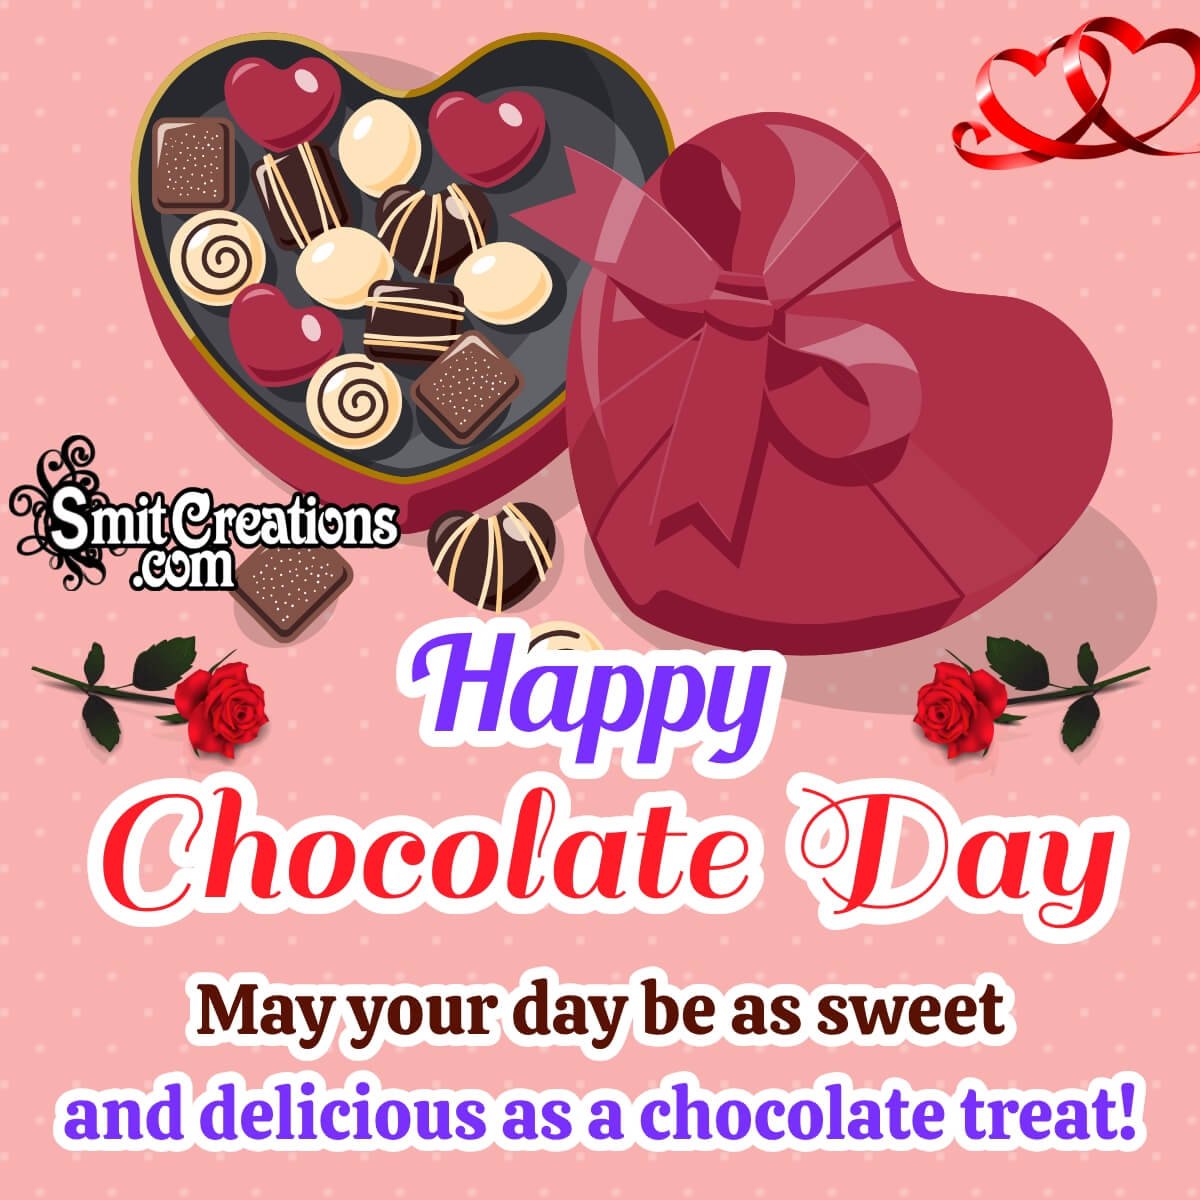 Happy Chocolate Day Greetings